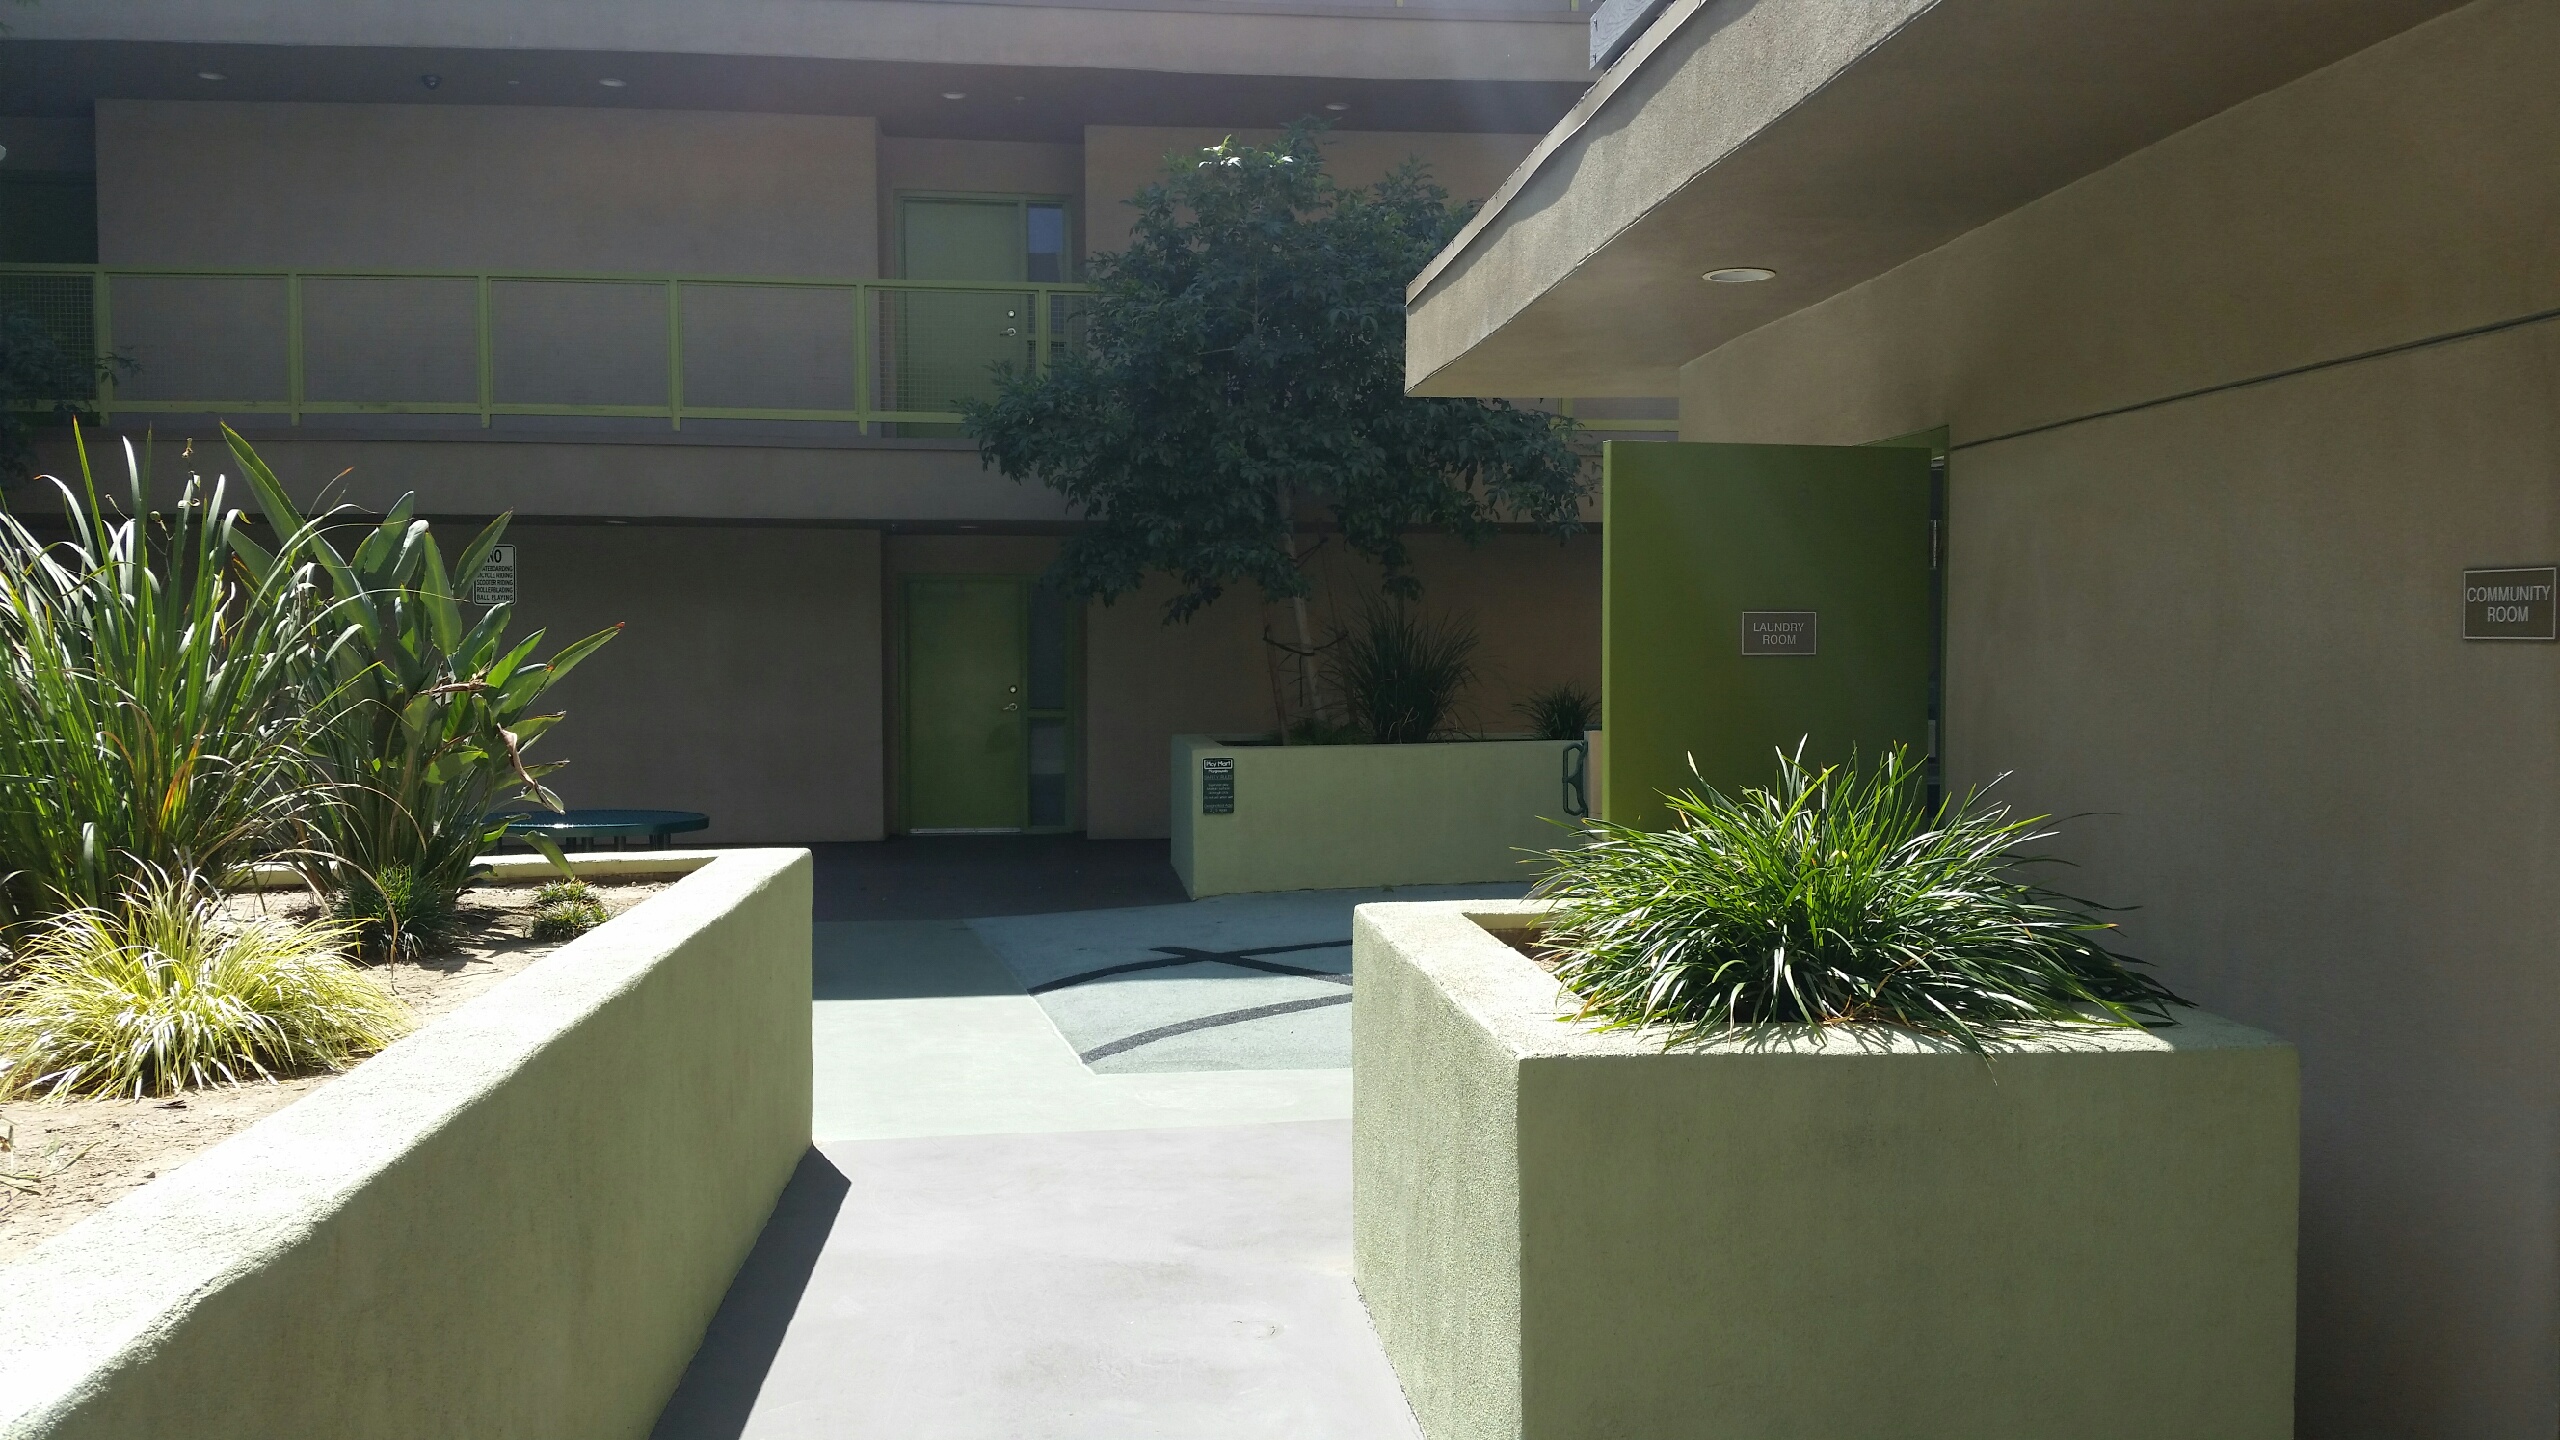 Sichel family housing courtyard area. Large area with with planters throughout. bench and table seating area